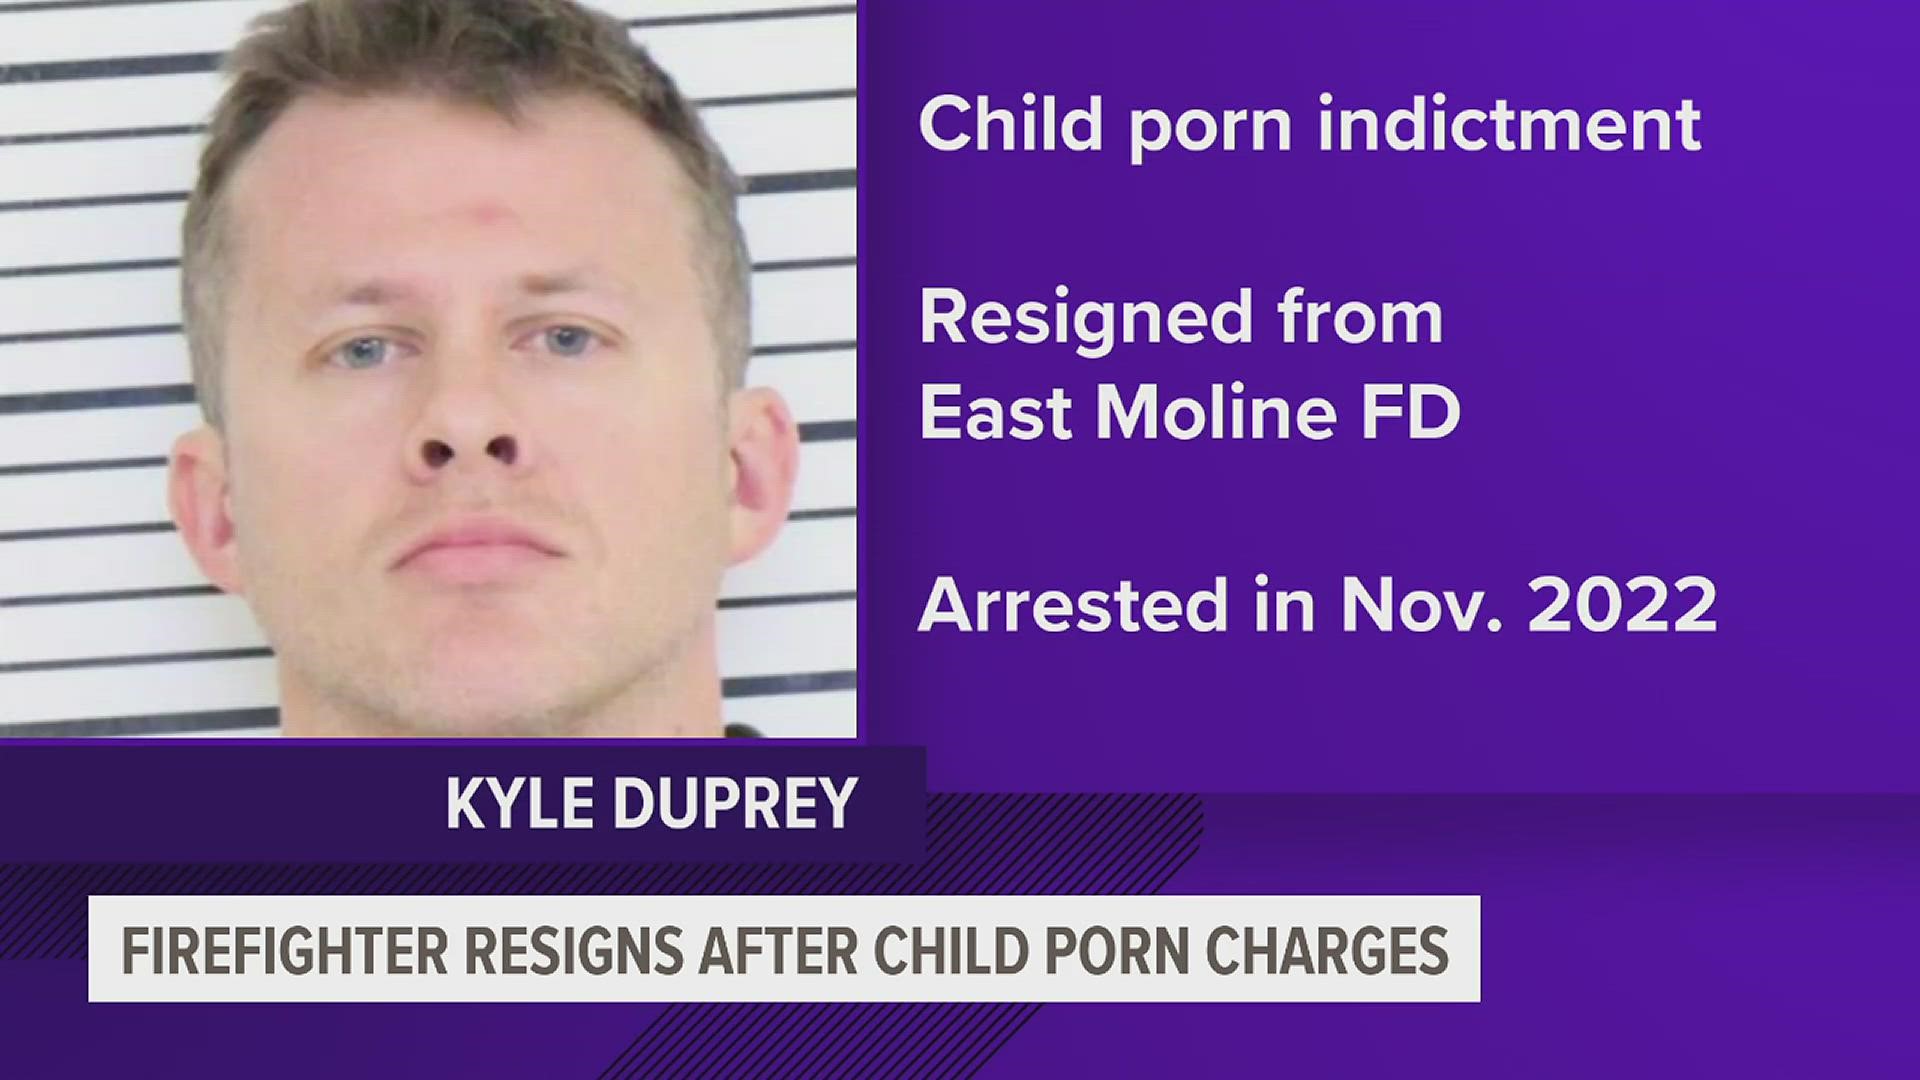 Now-former firefighter Kyle Duprey submitted his resignation on Wednesday and the City of East Moline said it is continuing to cooperate with federal authorities.